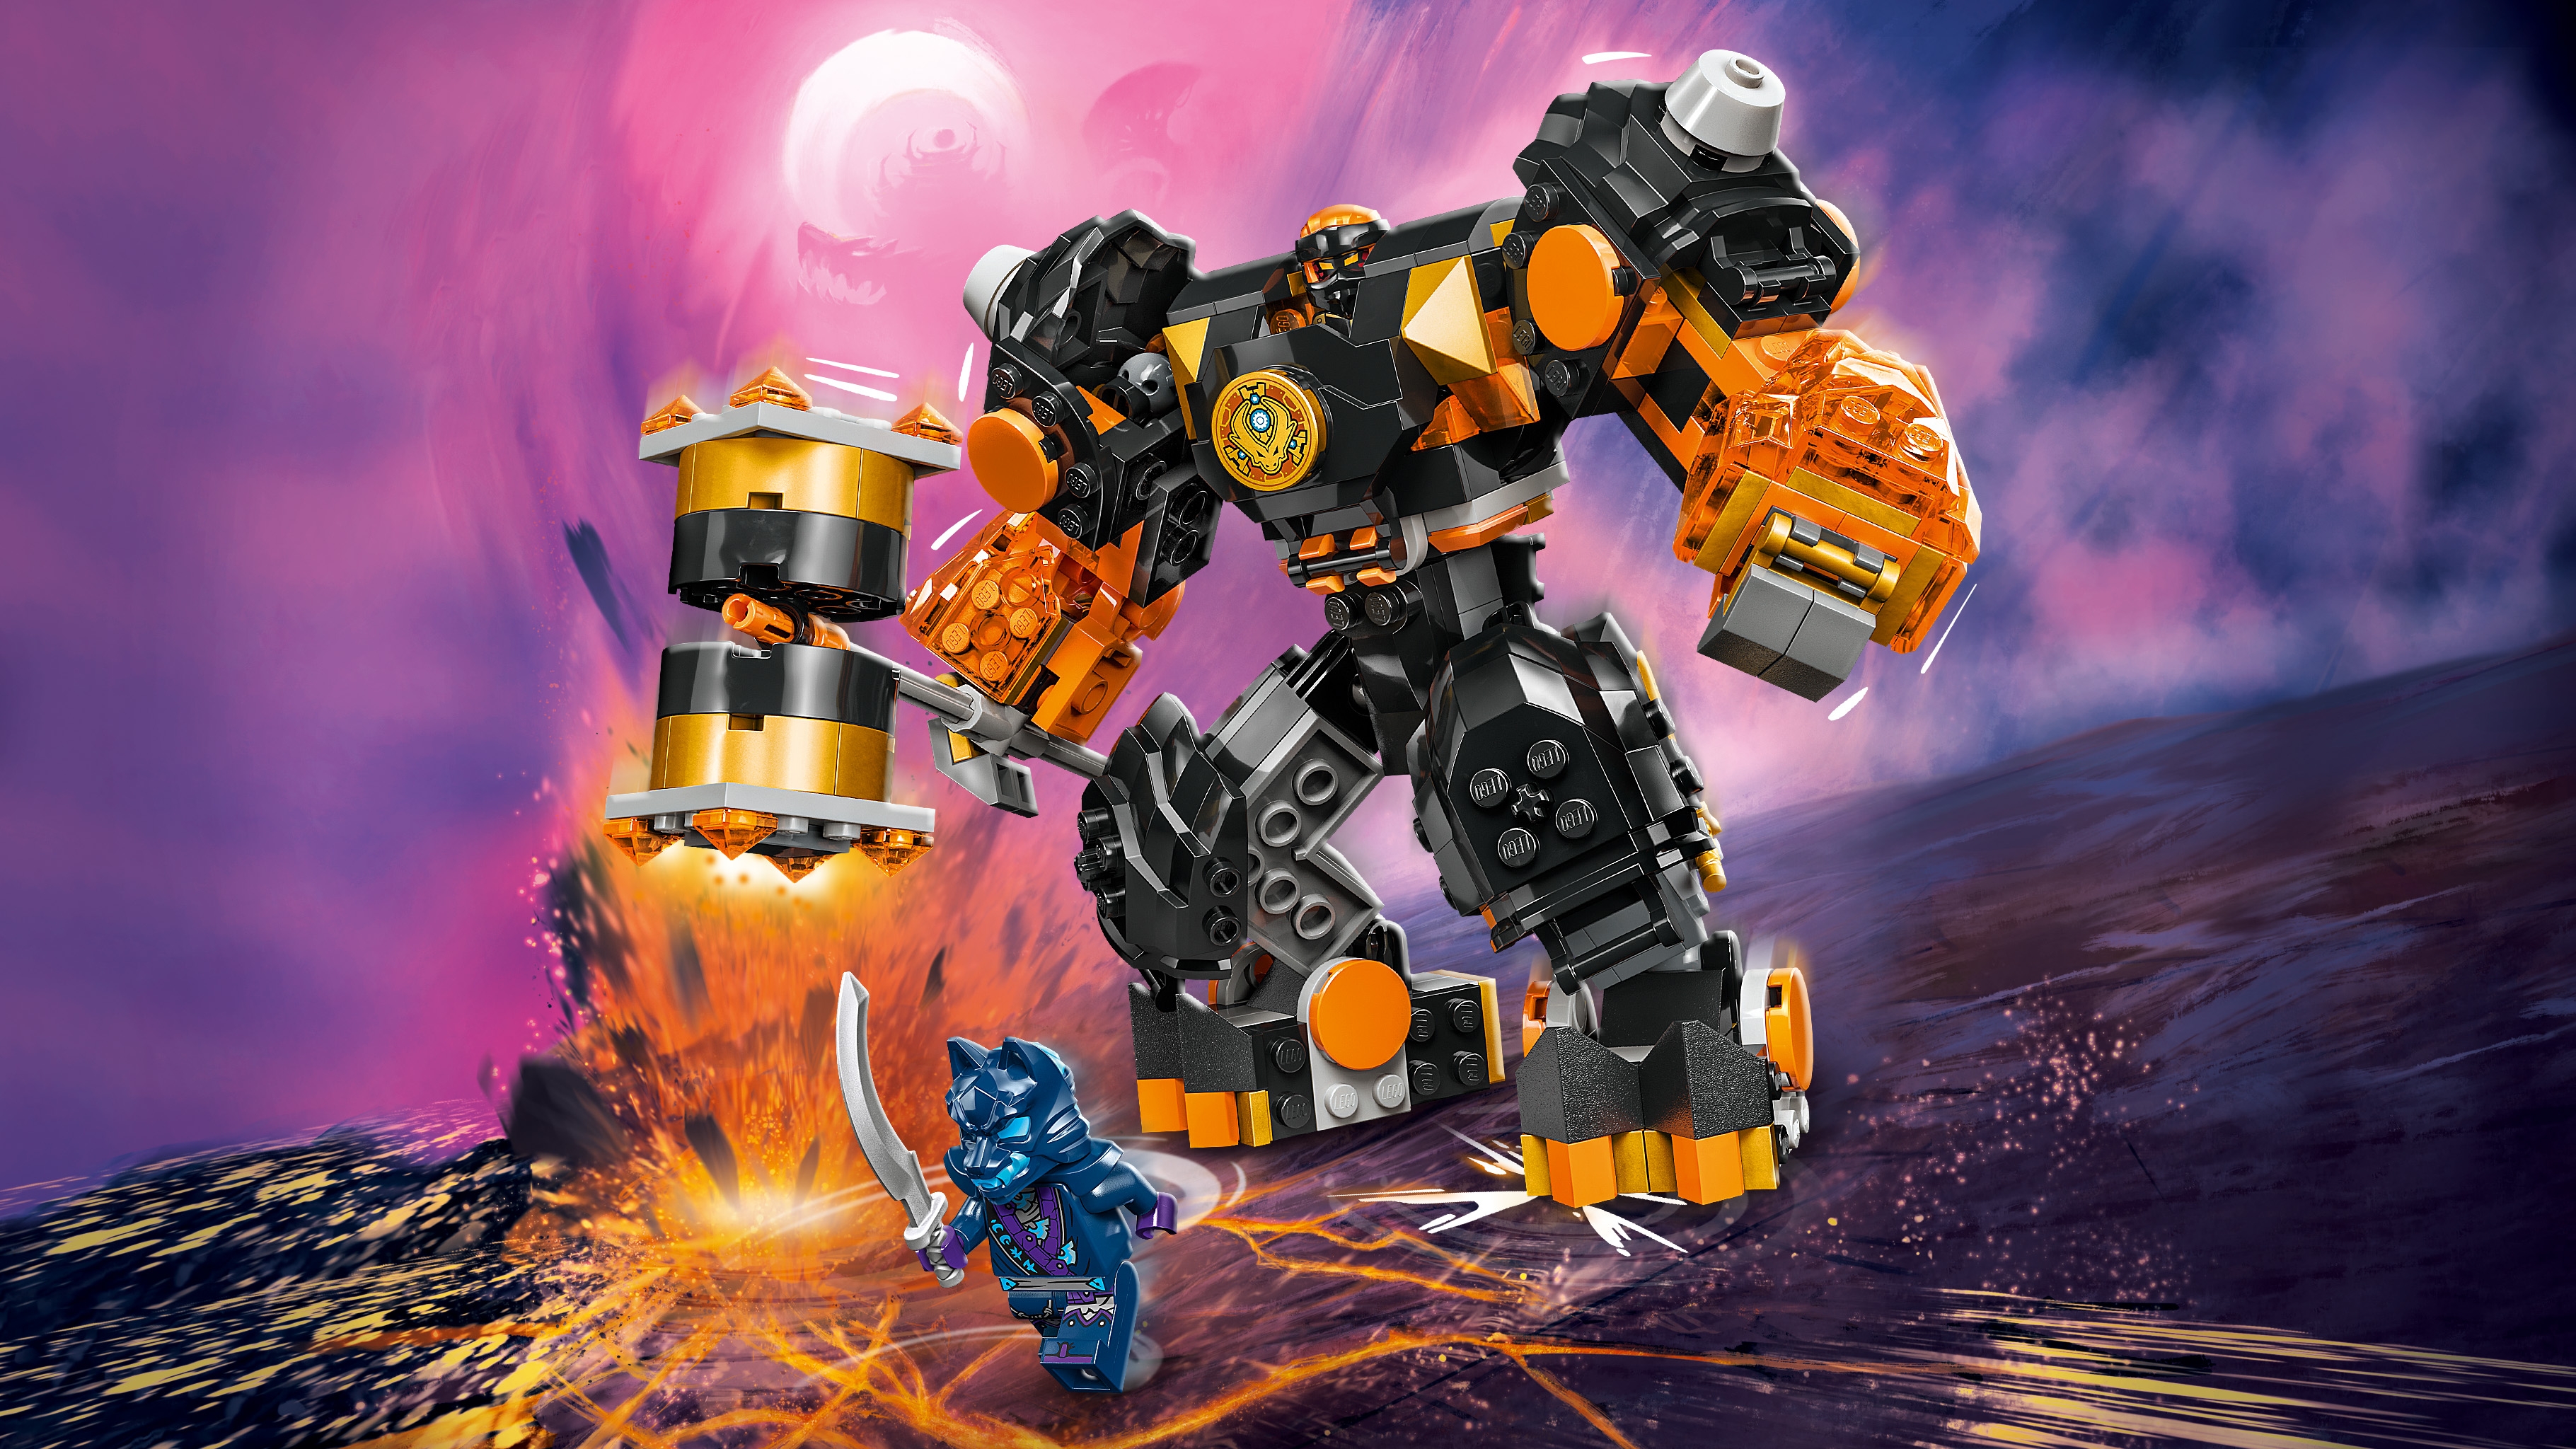 How to Build LEGO Weapons Hammer Golem Lego Compatible 